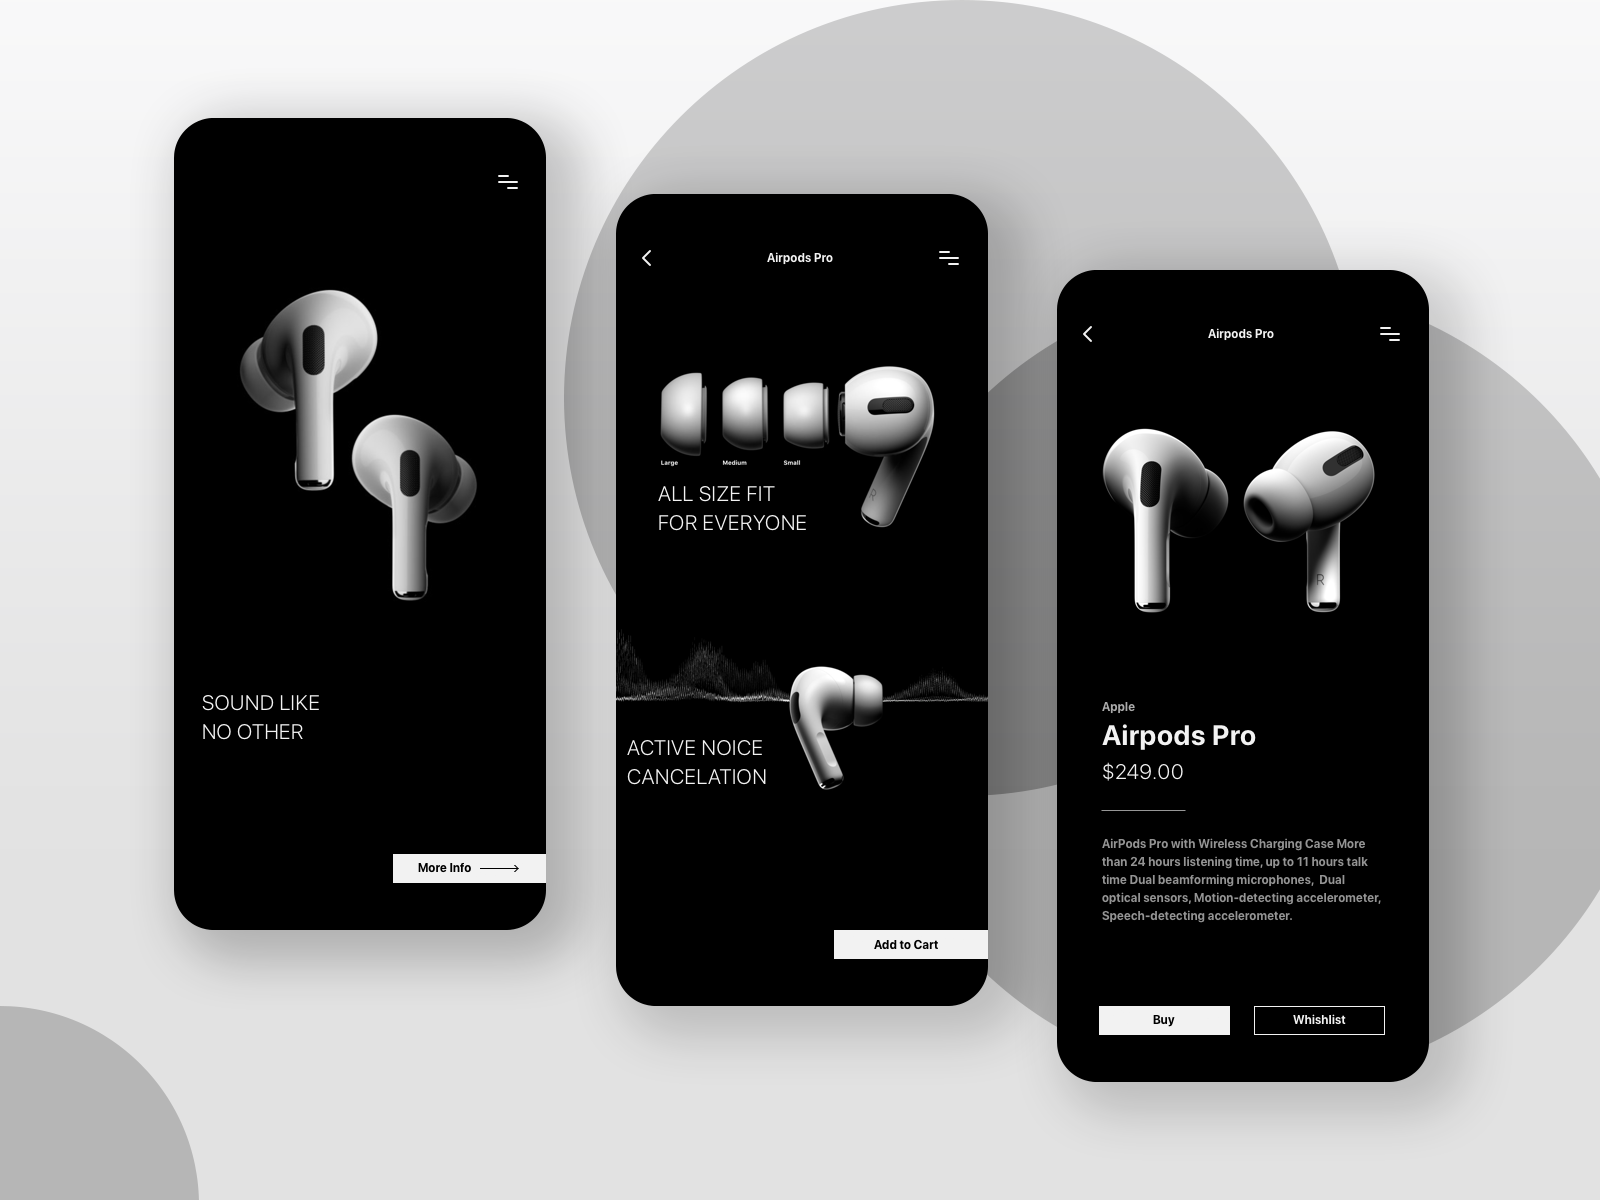 Airpods pro ios. AIRPODS Pro with Wireless Charging. AIRPODS Pro 2nd Generation. Дизайн AIRPODS Pro. Наушники айфон Макс.